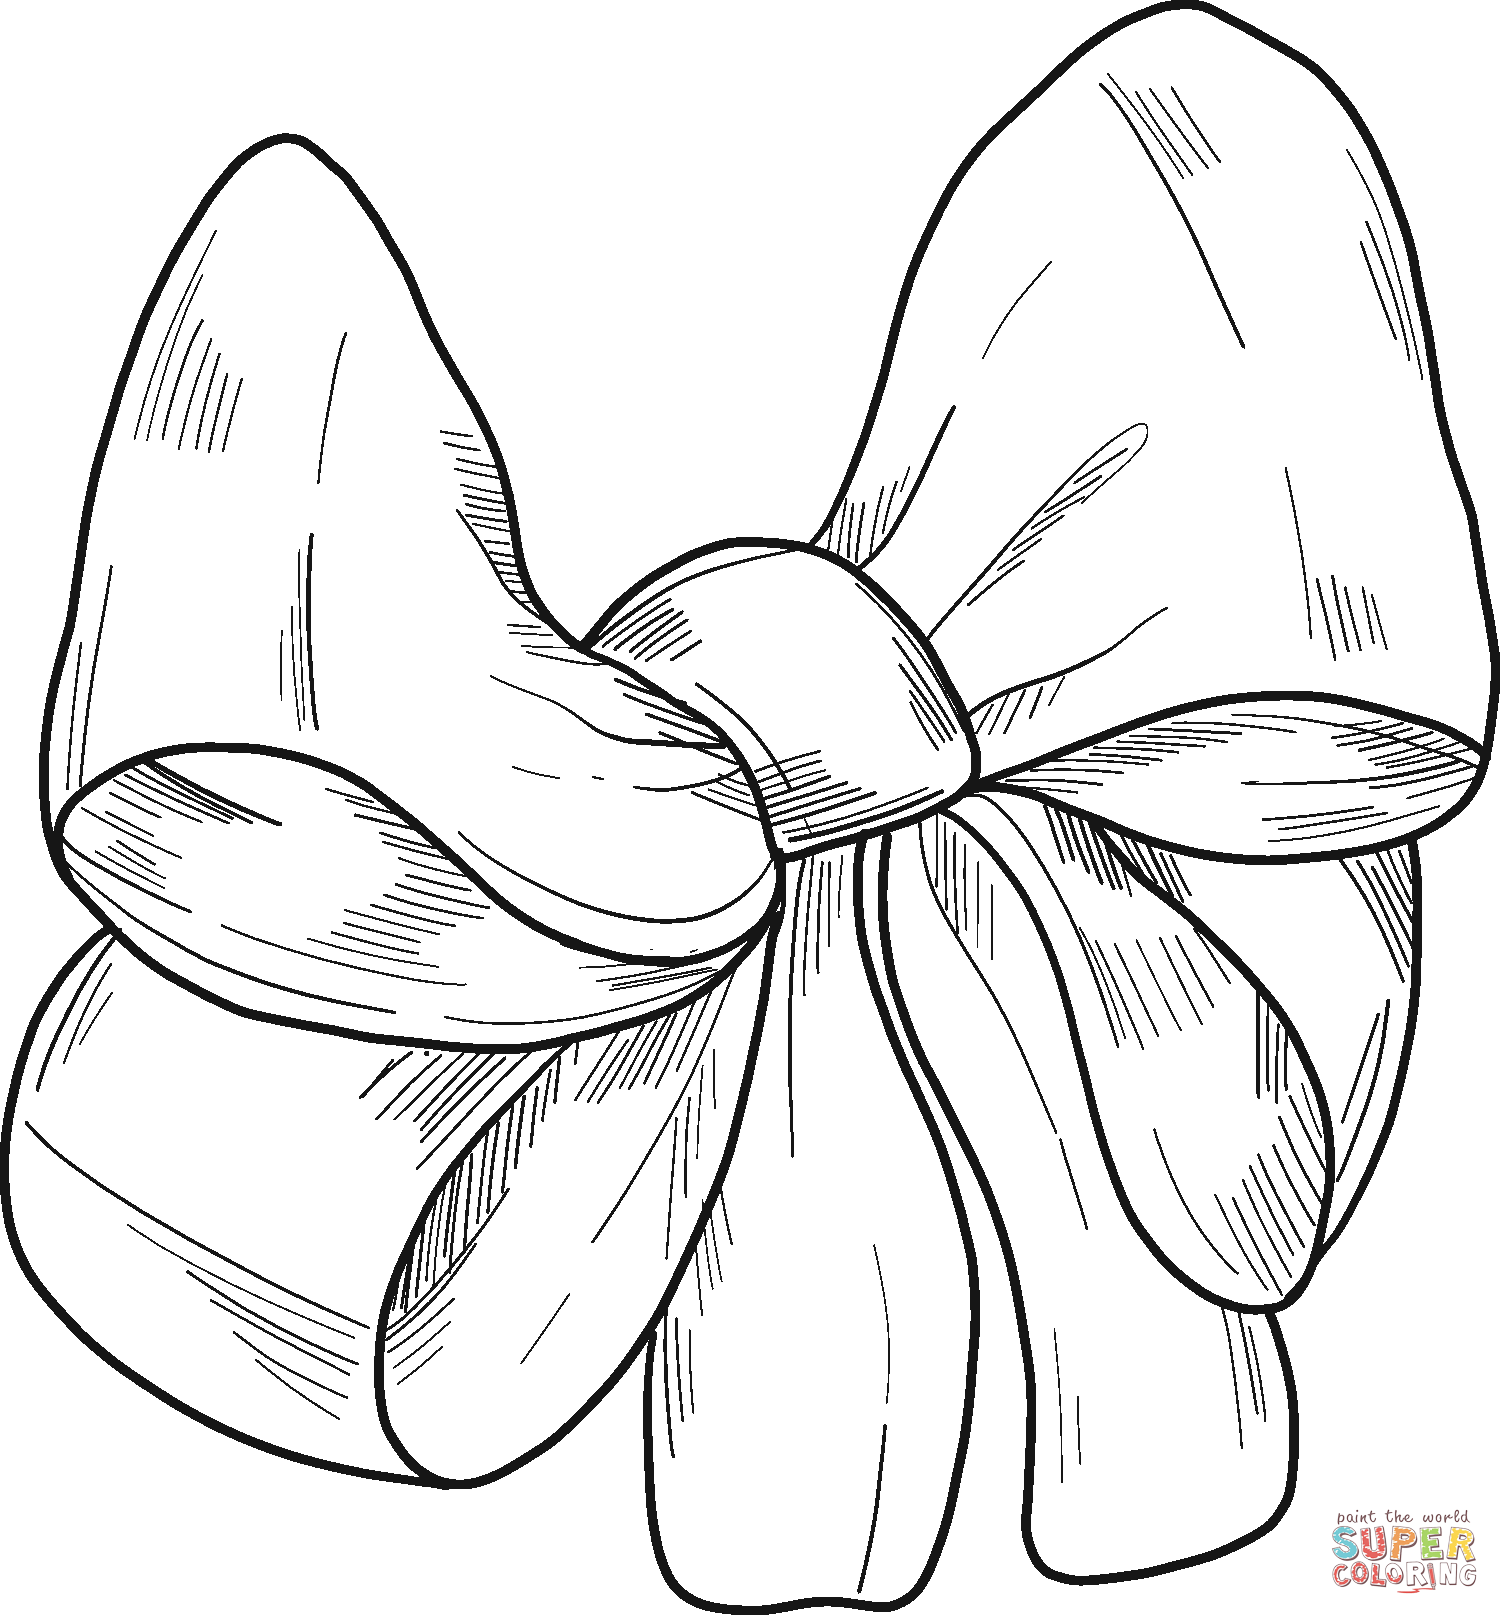 Bow coloring page | Free Printable Coloring Pages